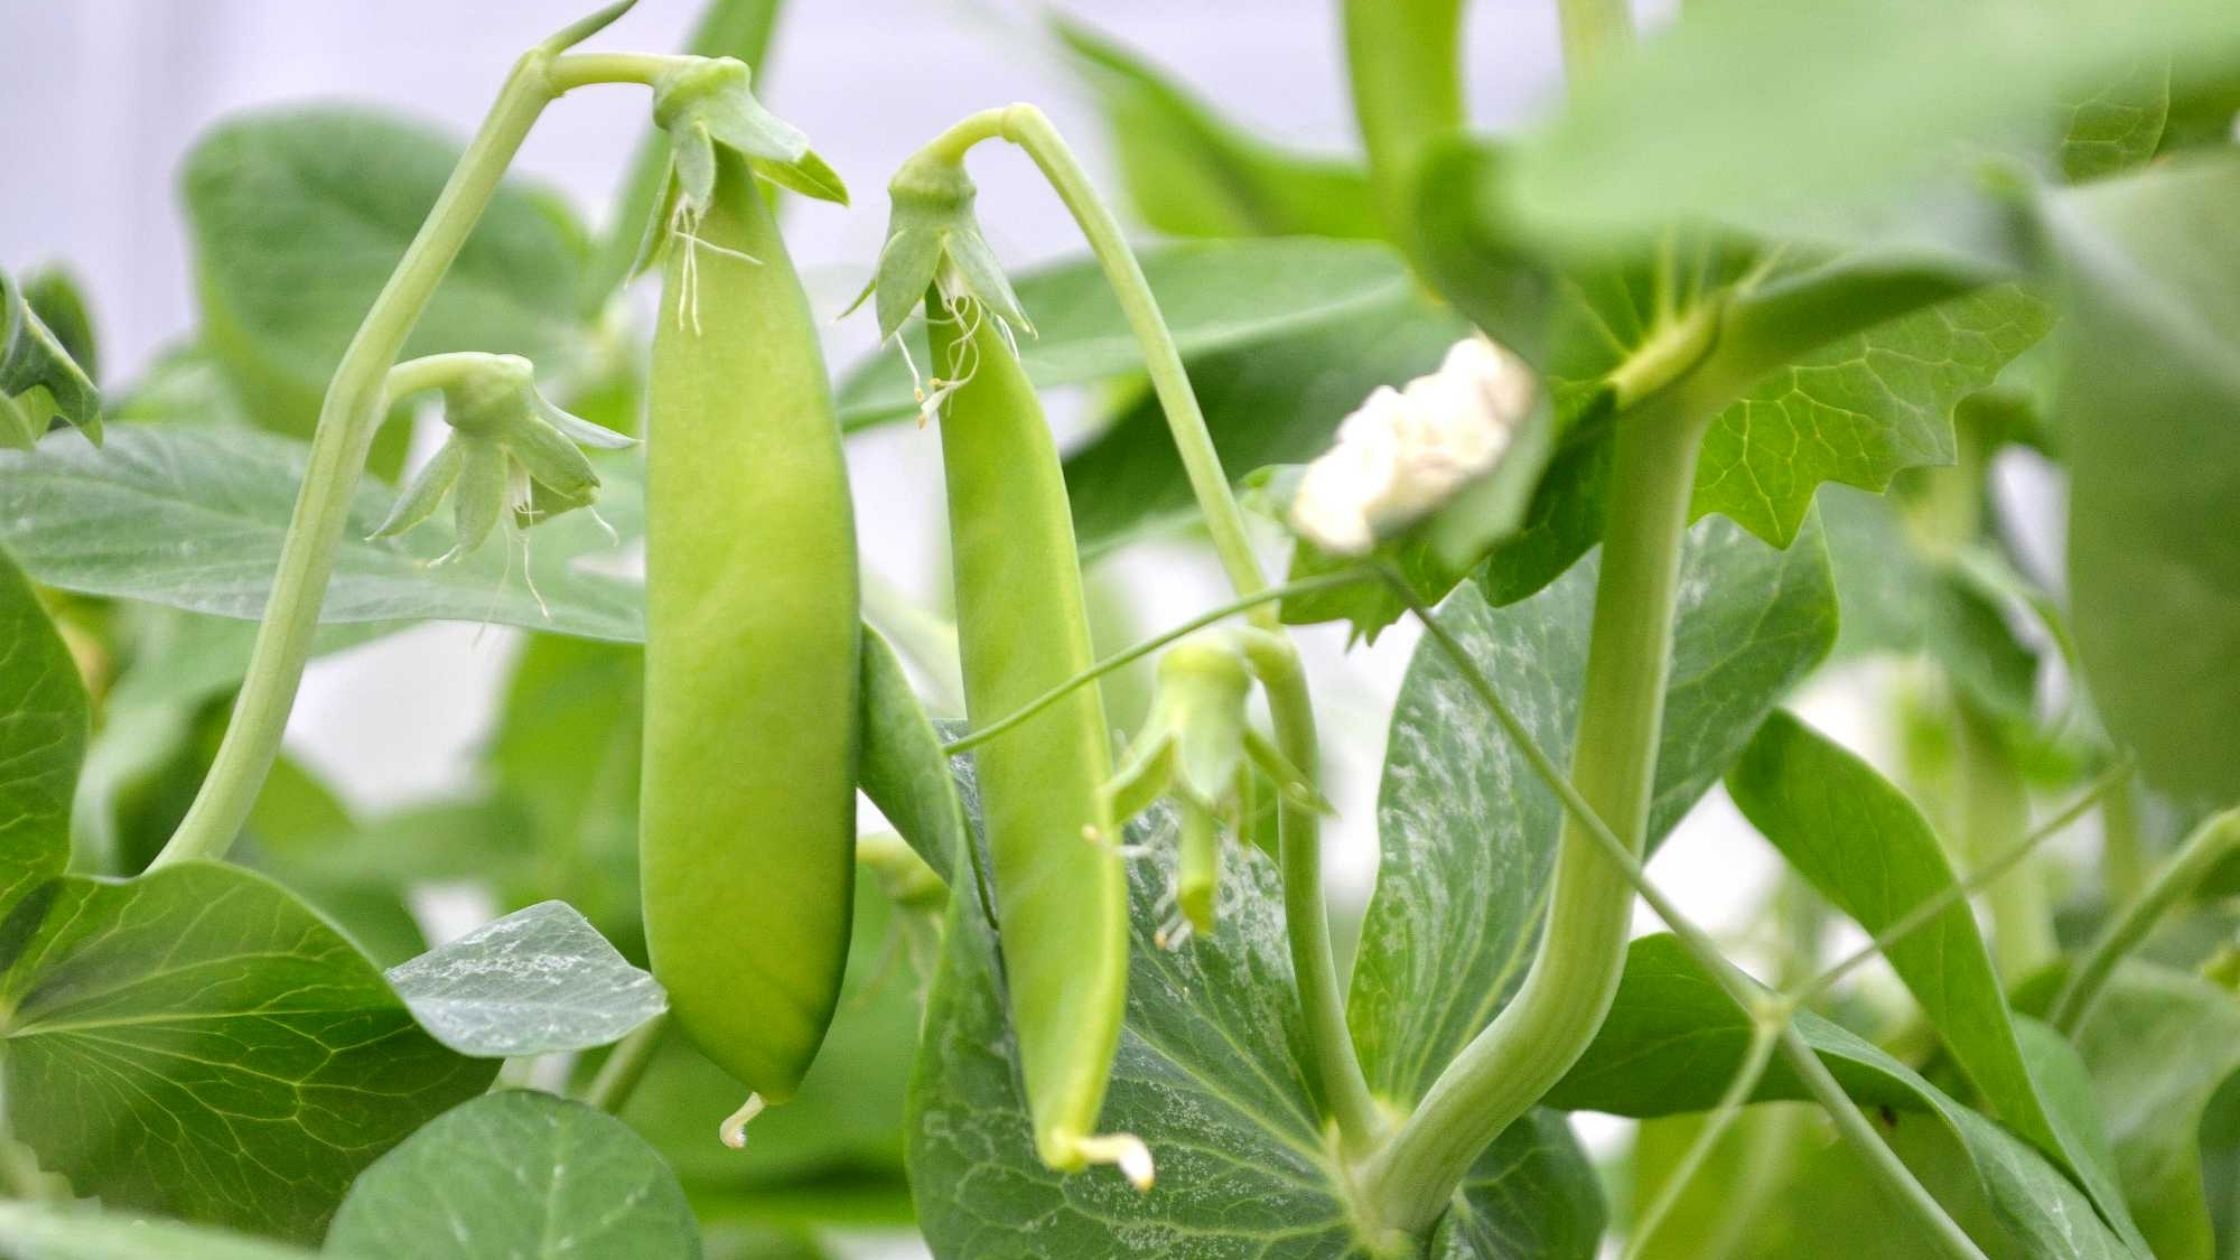 People of Bihar will now take a healthy diet of salad peas